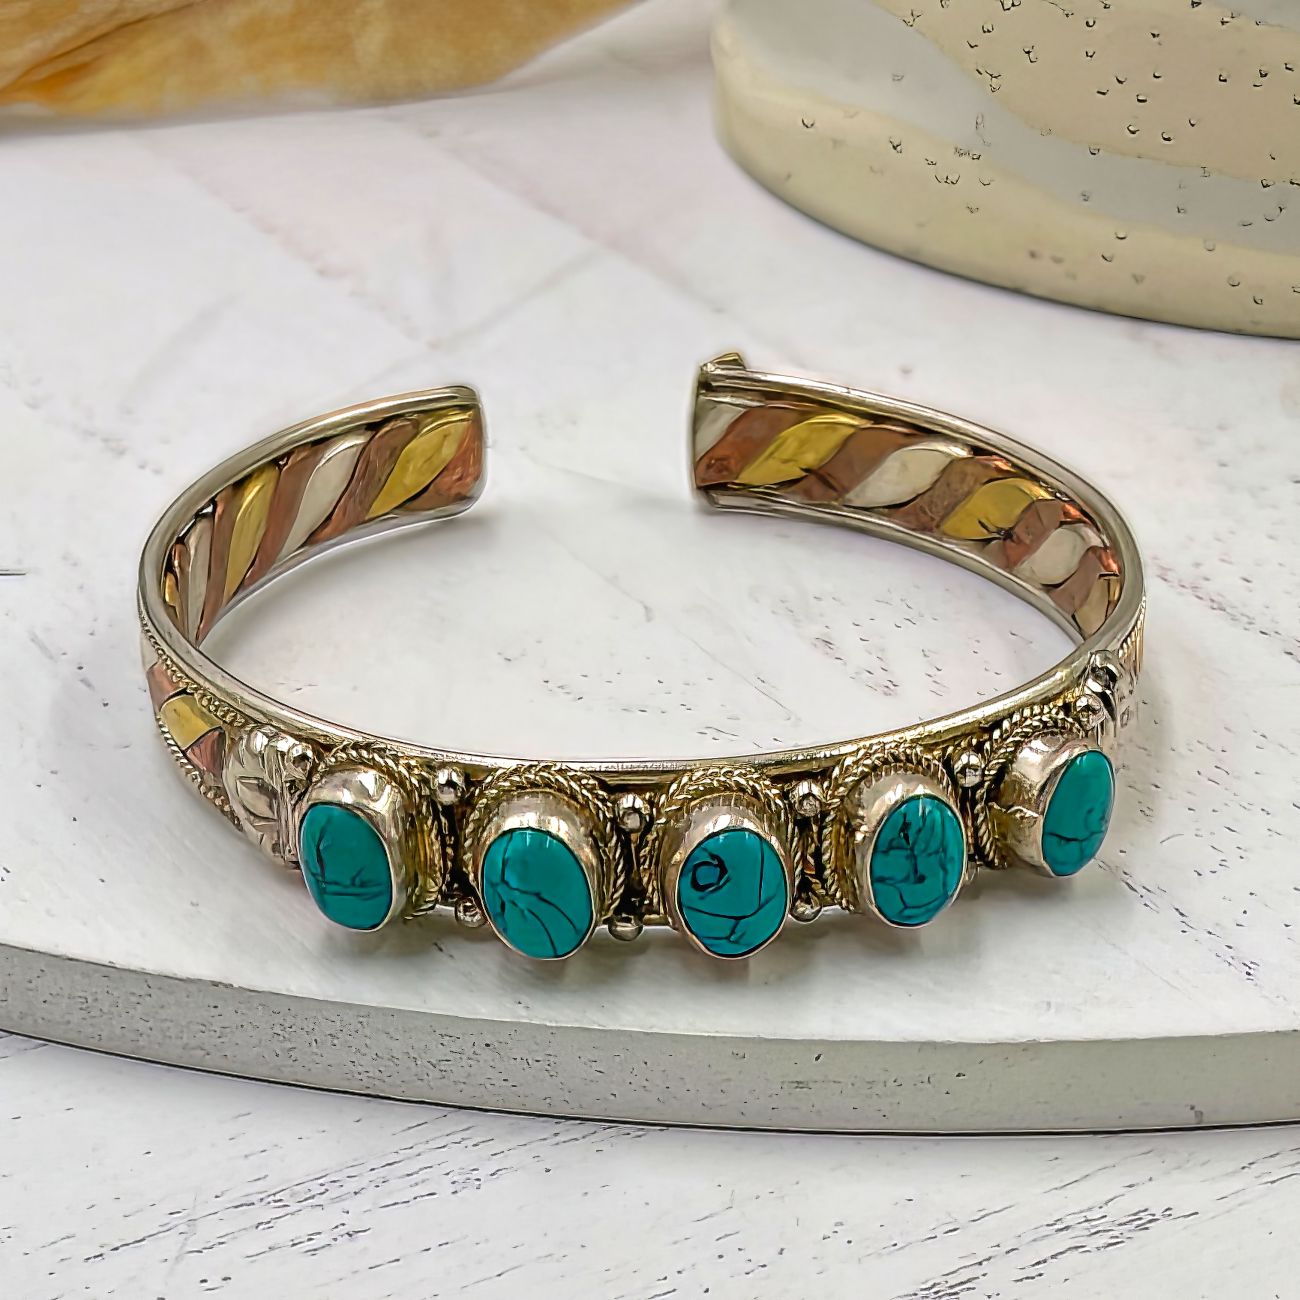 Silver and Turquoise Embossed Tibetan Cuff Bracelet